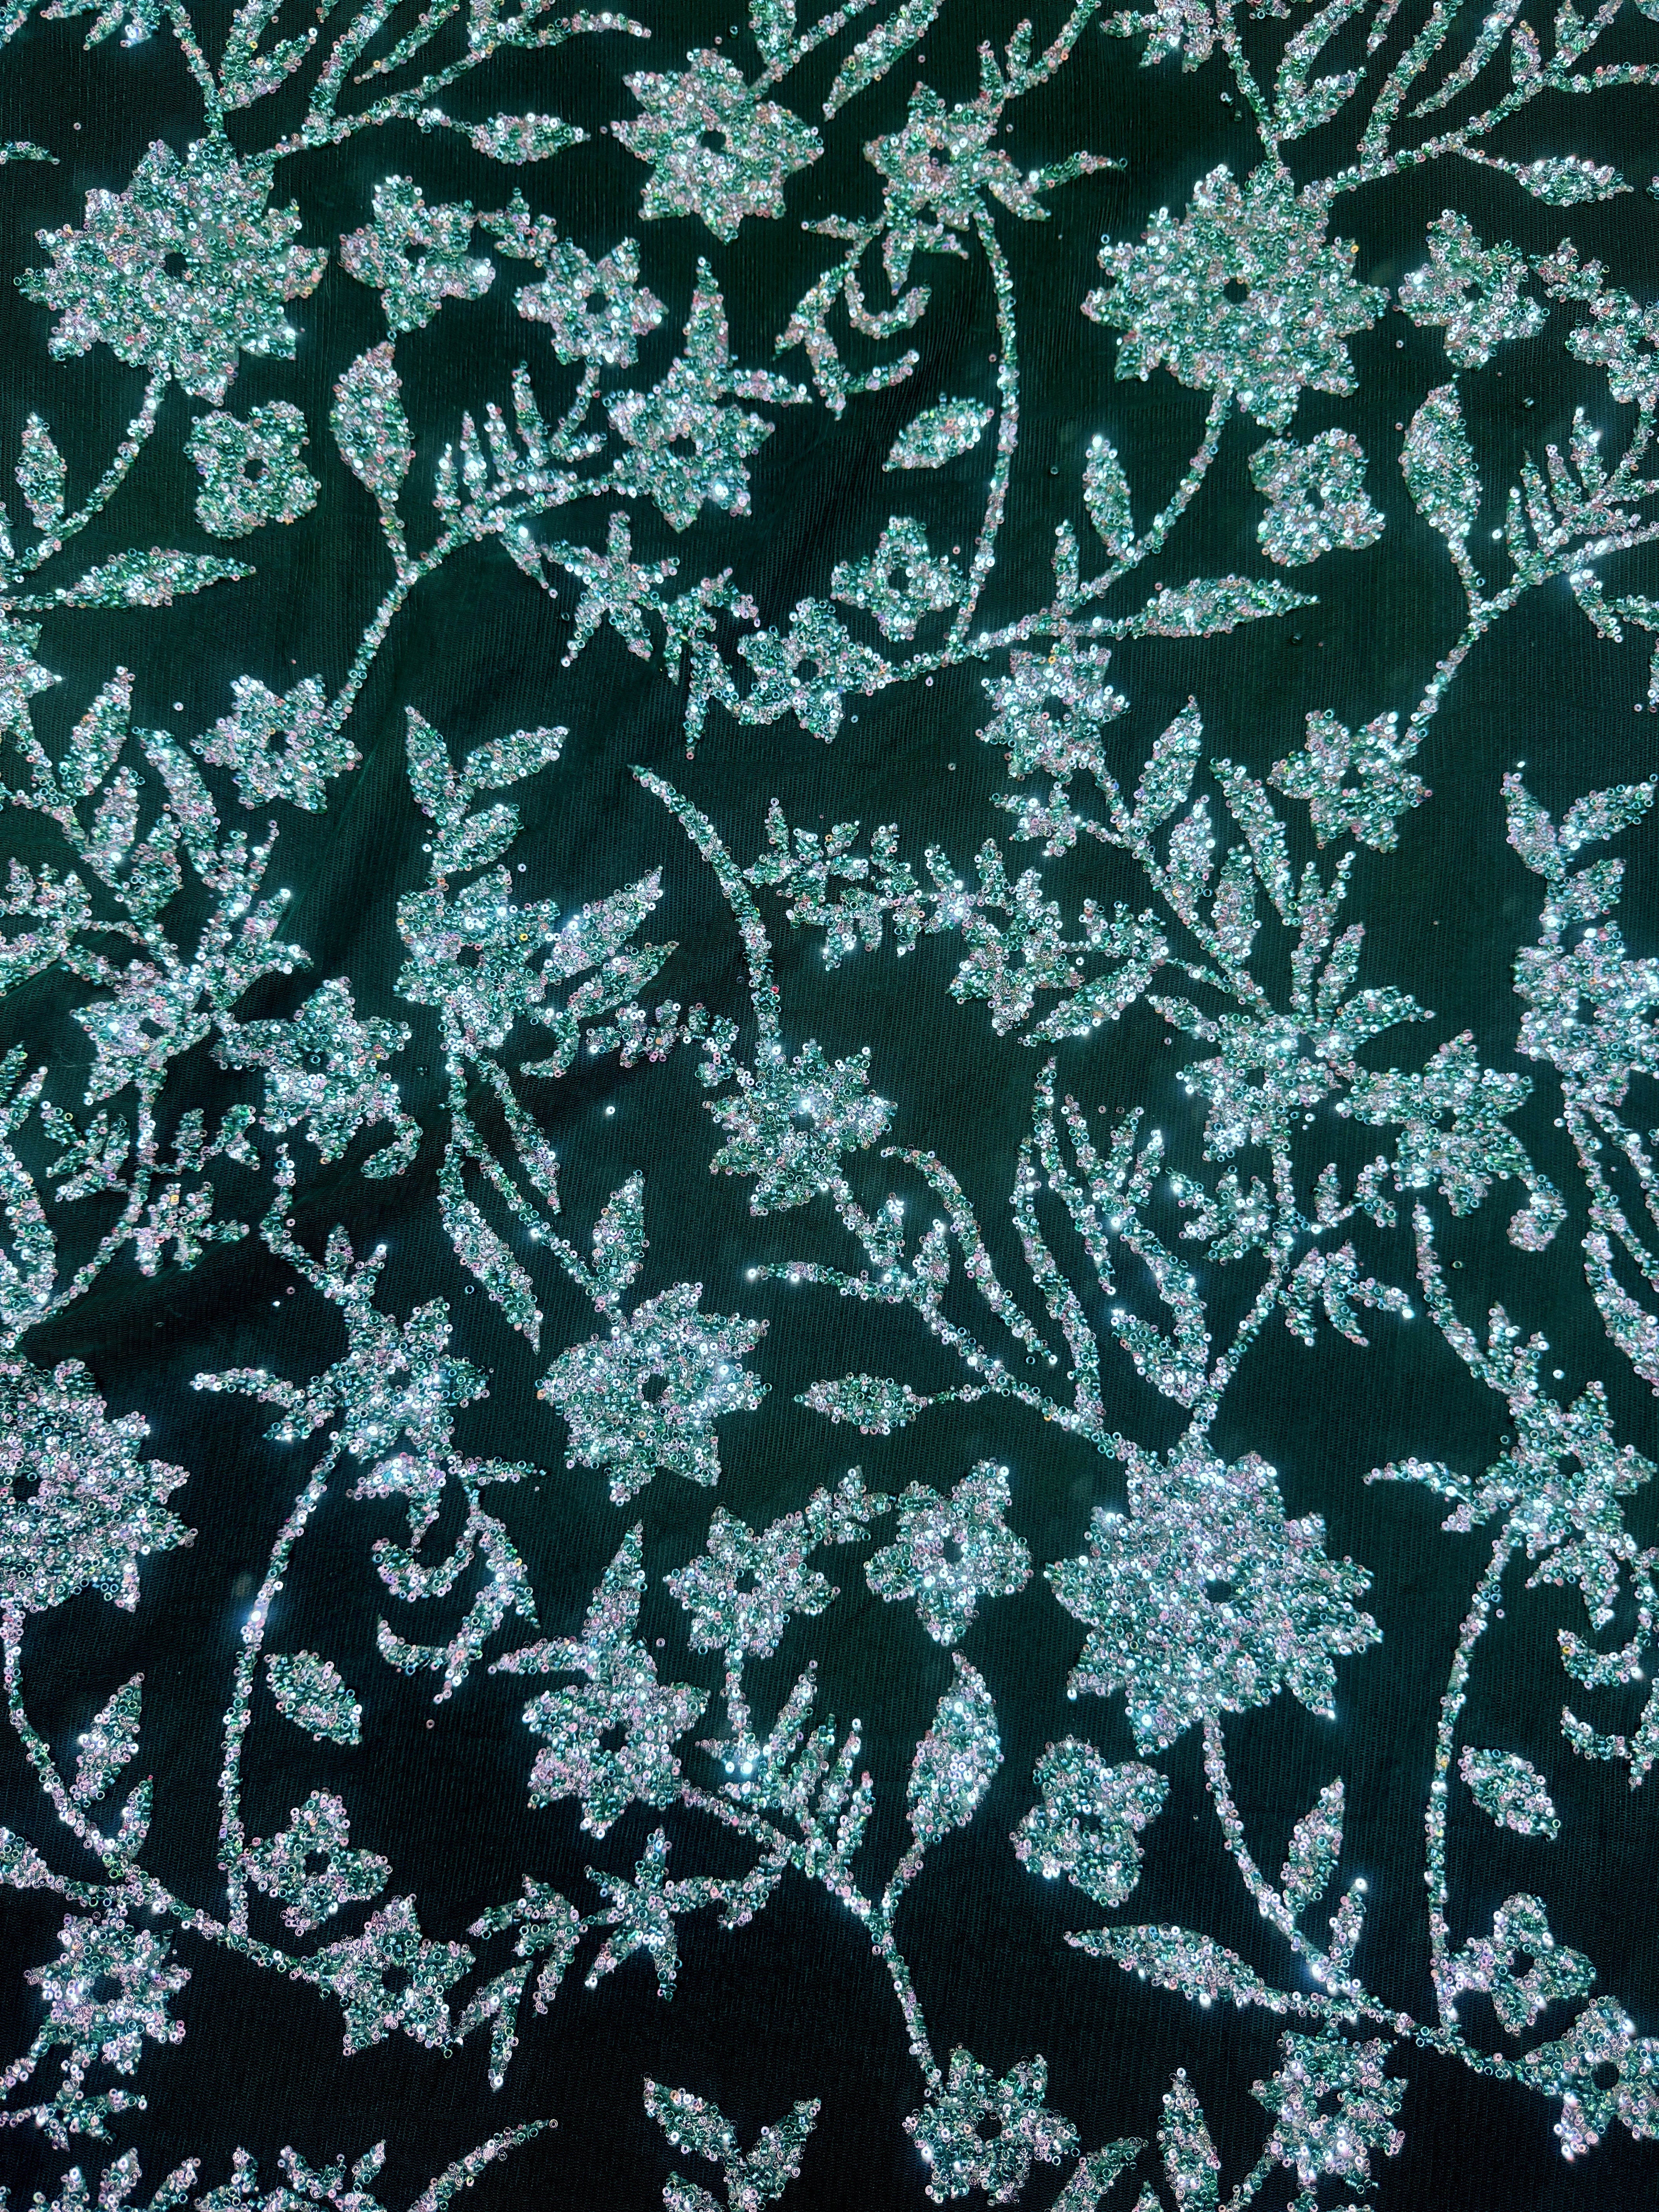 Green Silver Floral Beaded Lace, online textile store, sewing, fabric store, sewing store, cheap fabric store, kiki textiles